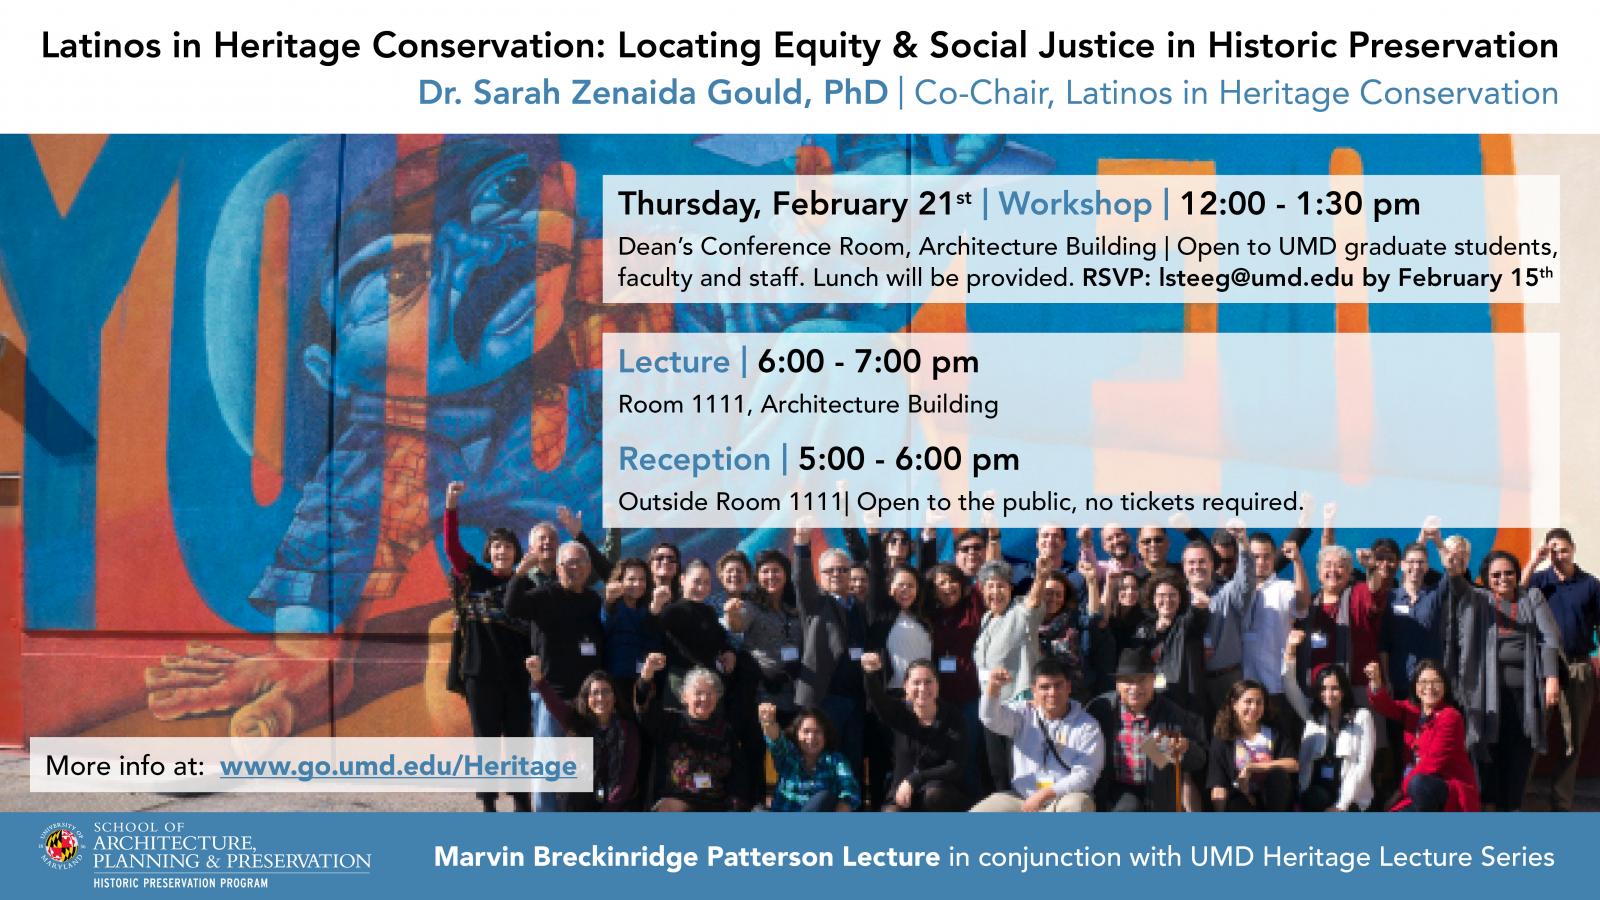 Latinos in Heritage Conservation: Locating Equity & Social Justice in Historic Preservation